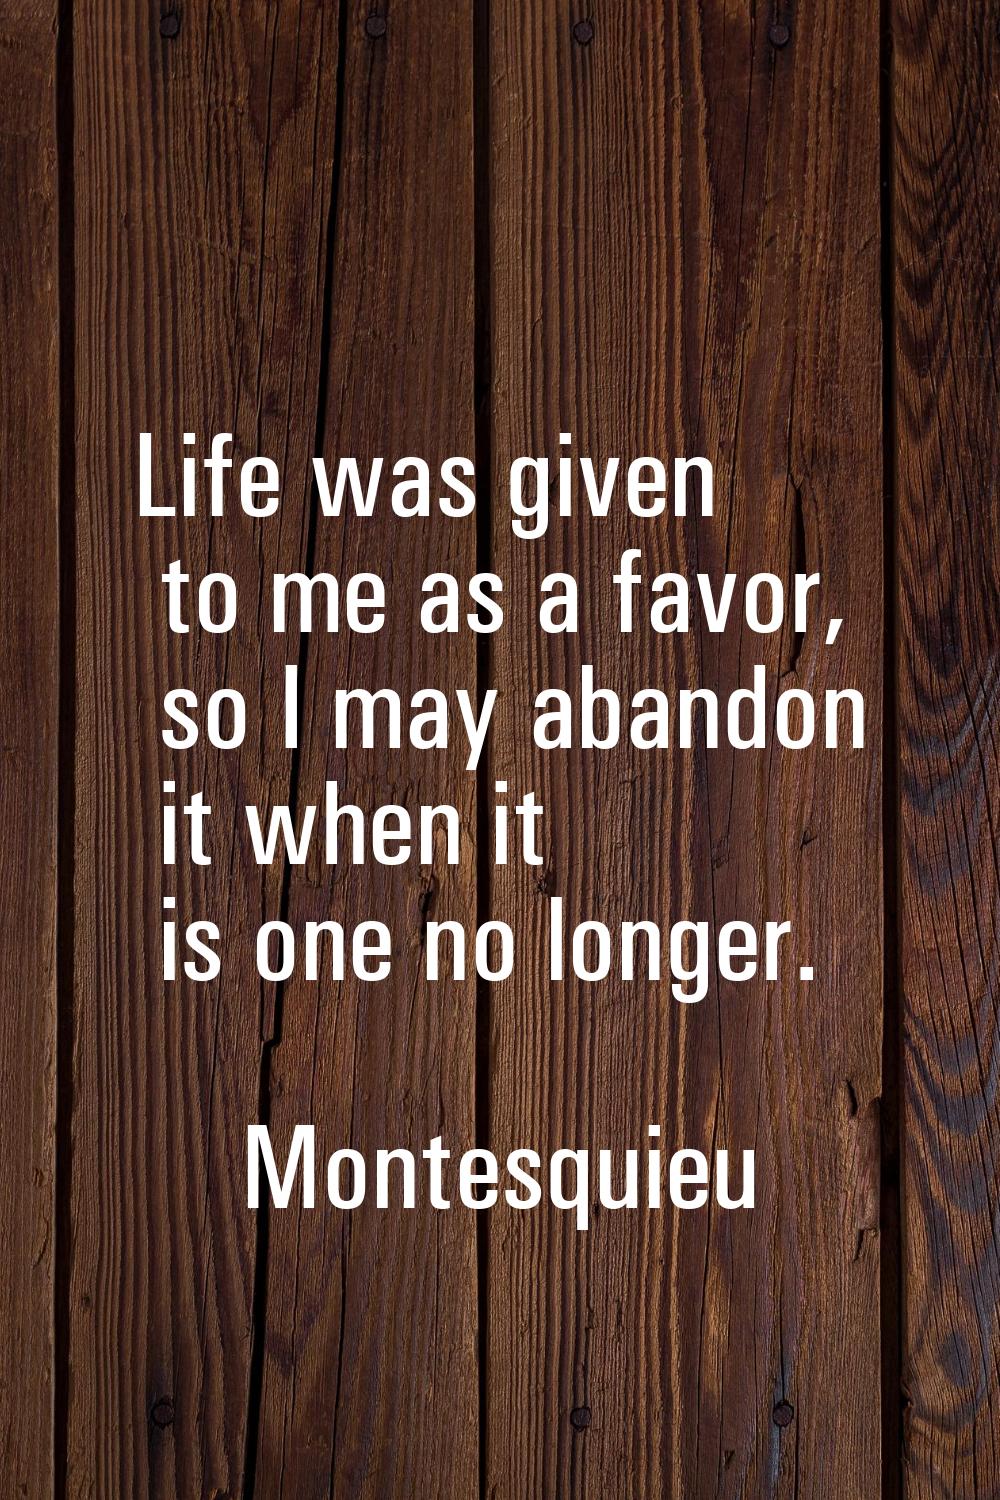 Life was given to me as a favor, so I may abandon it when it is one no longer.